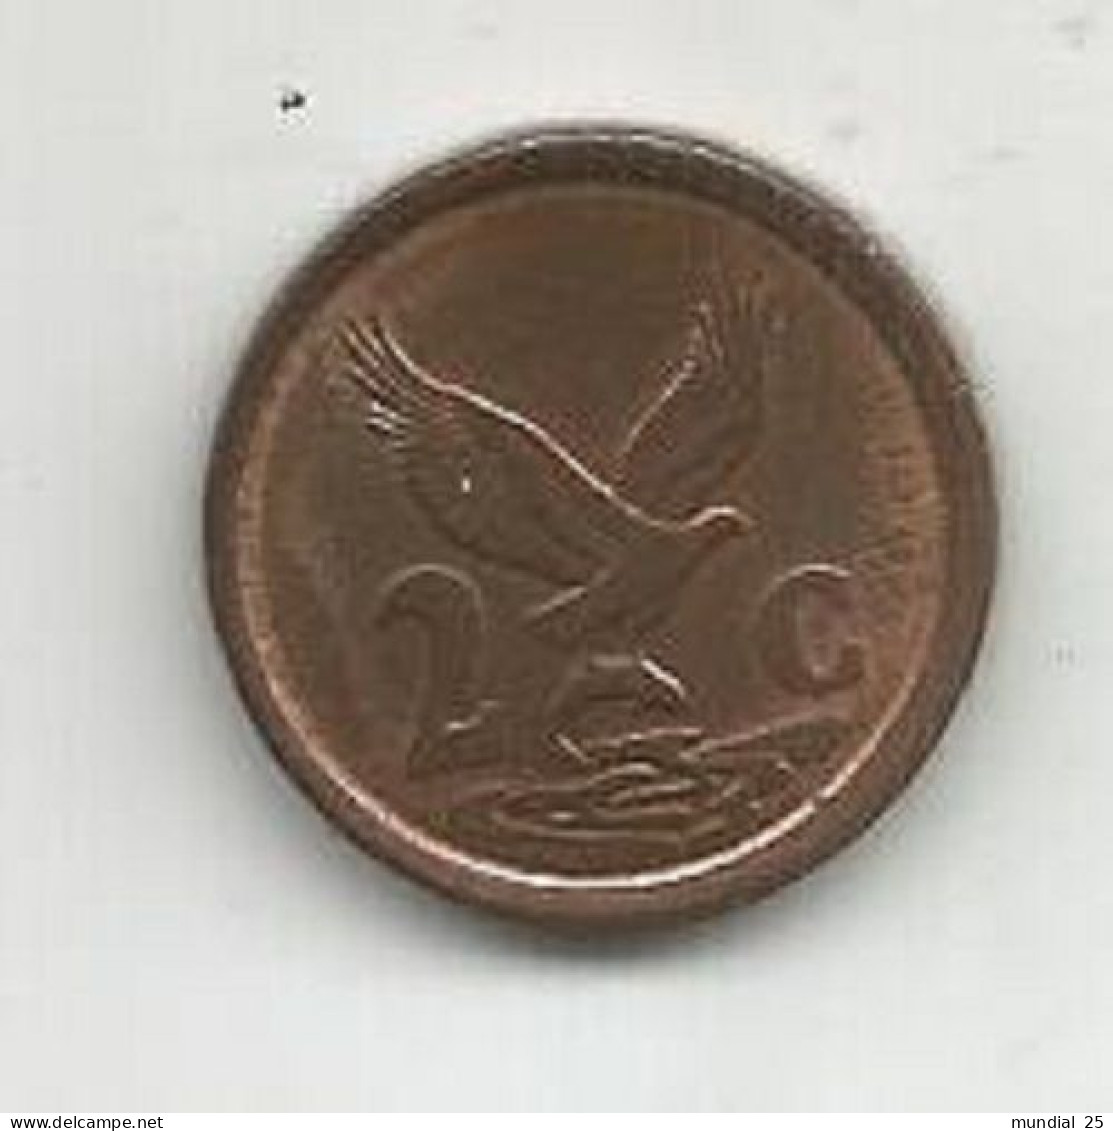 SOUTH AFRICA 2 CENTS 1991 - South Africa